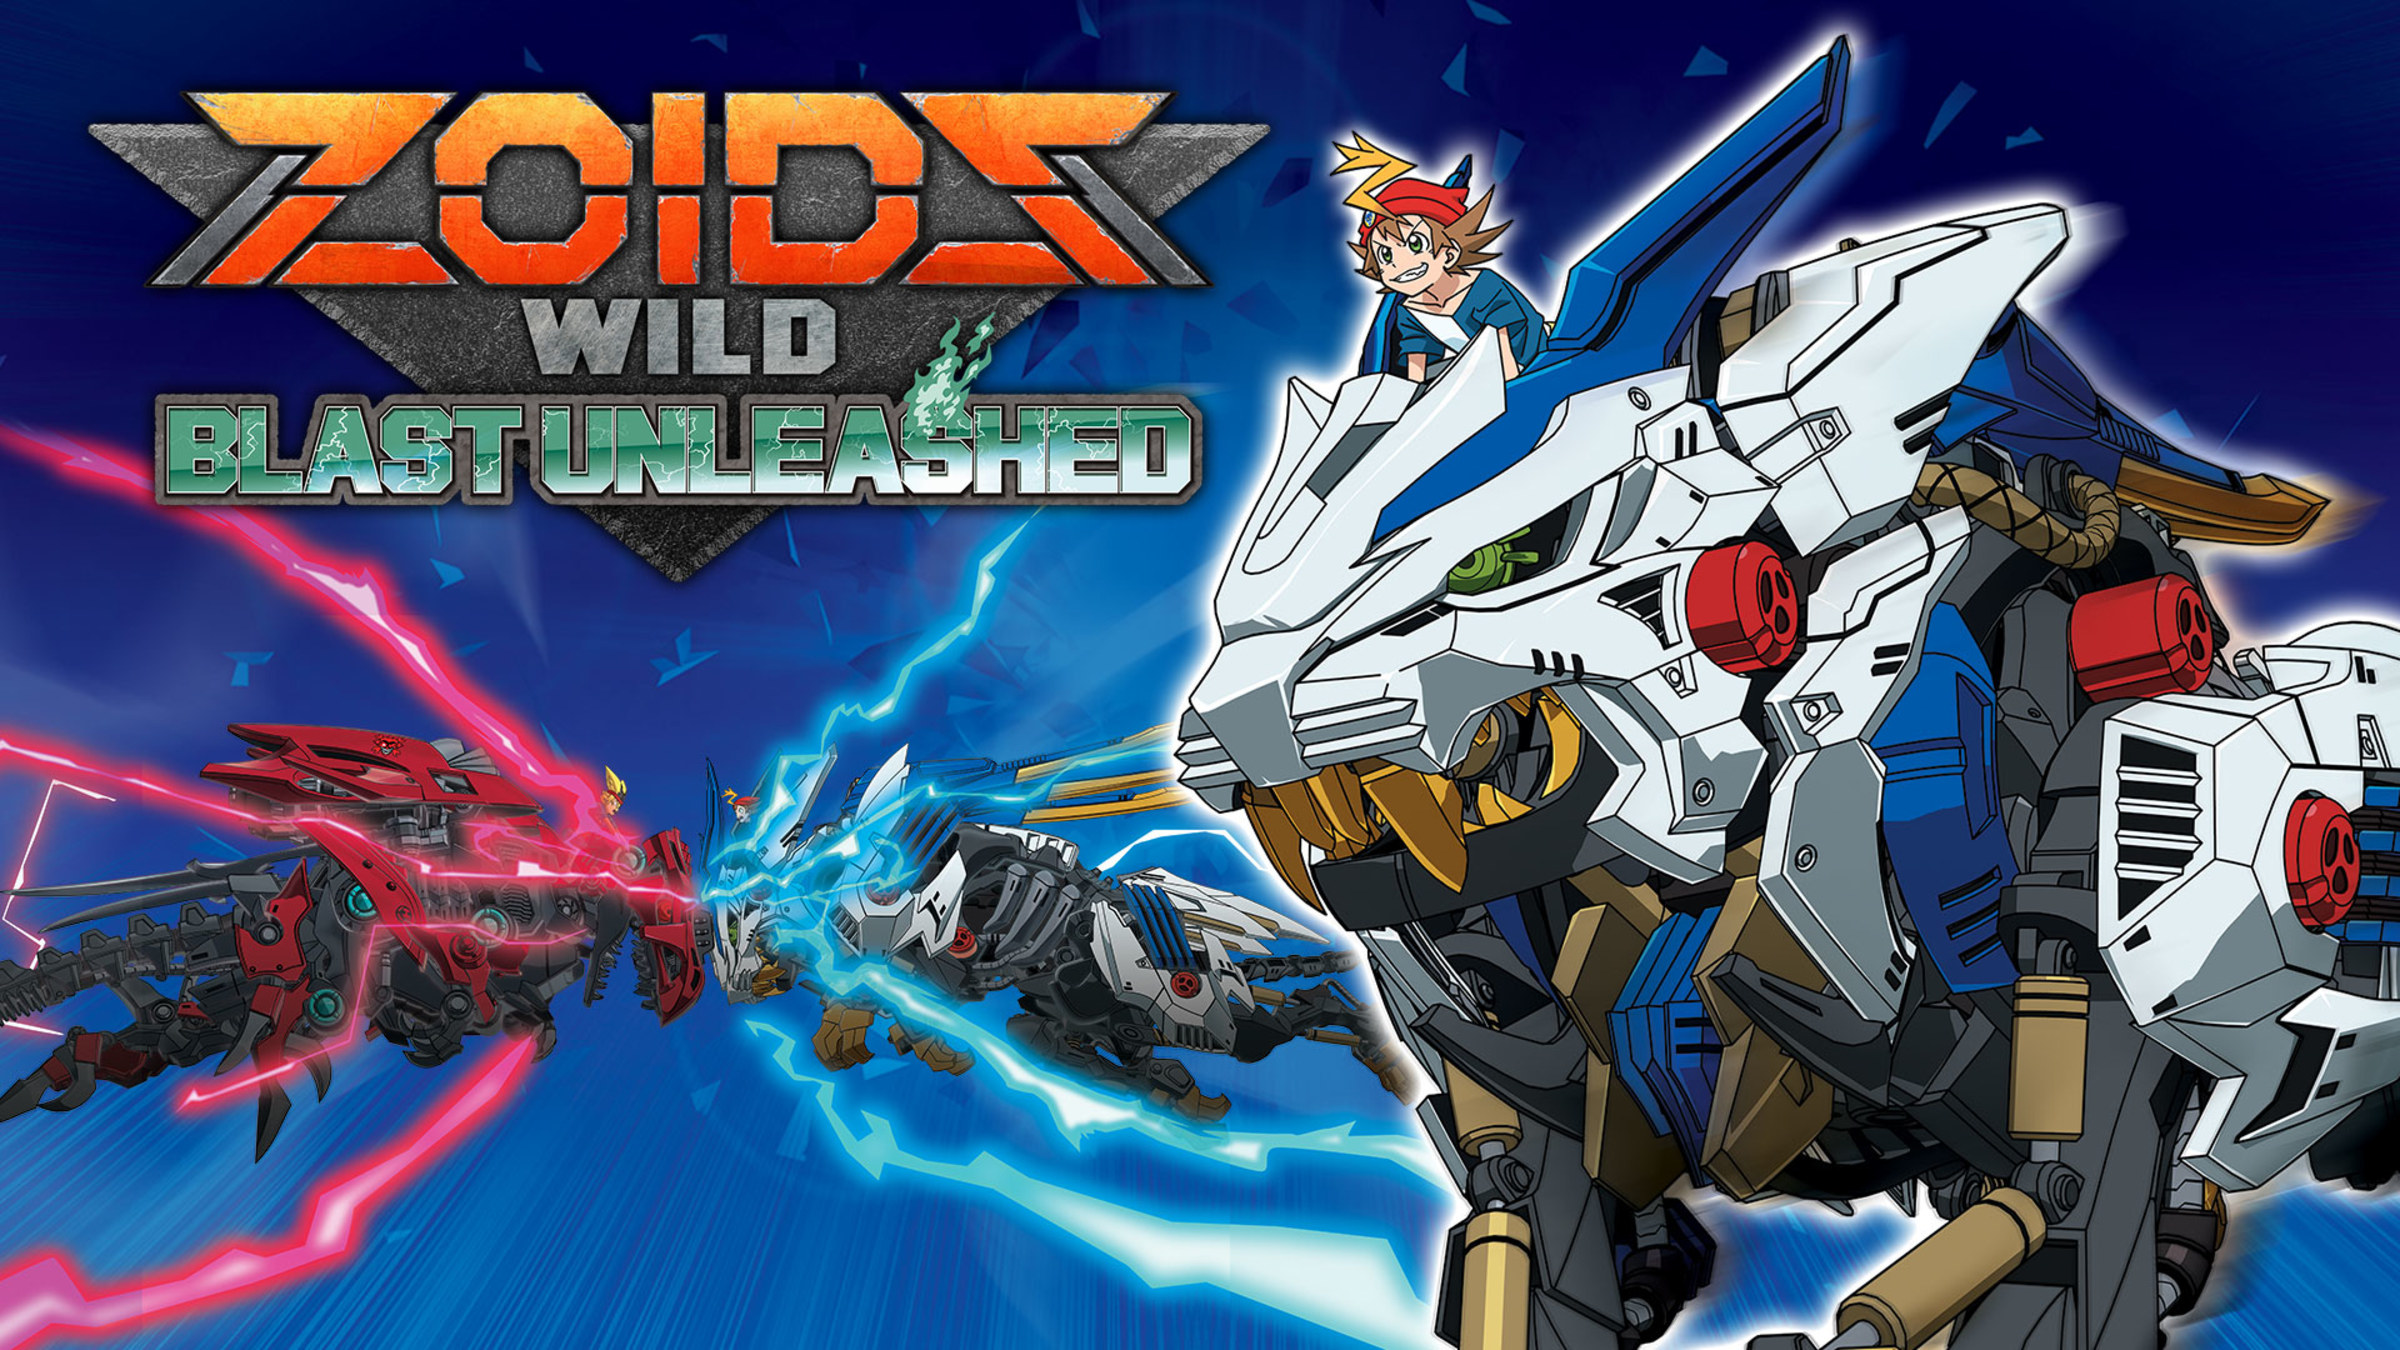 Zoids Wild Blast Unleashed for Nintendo Switch - Nintendo Official Site